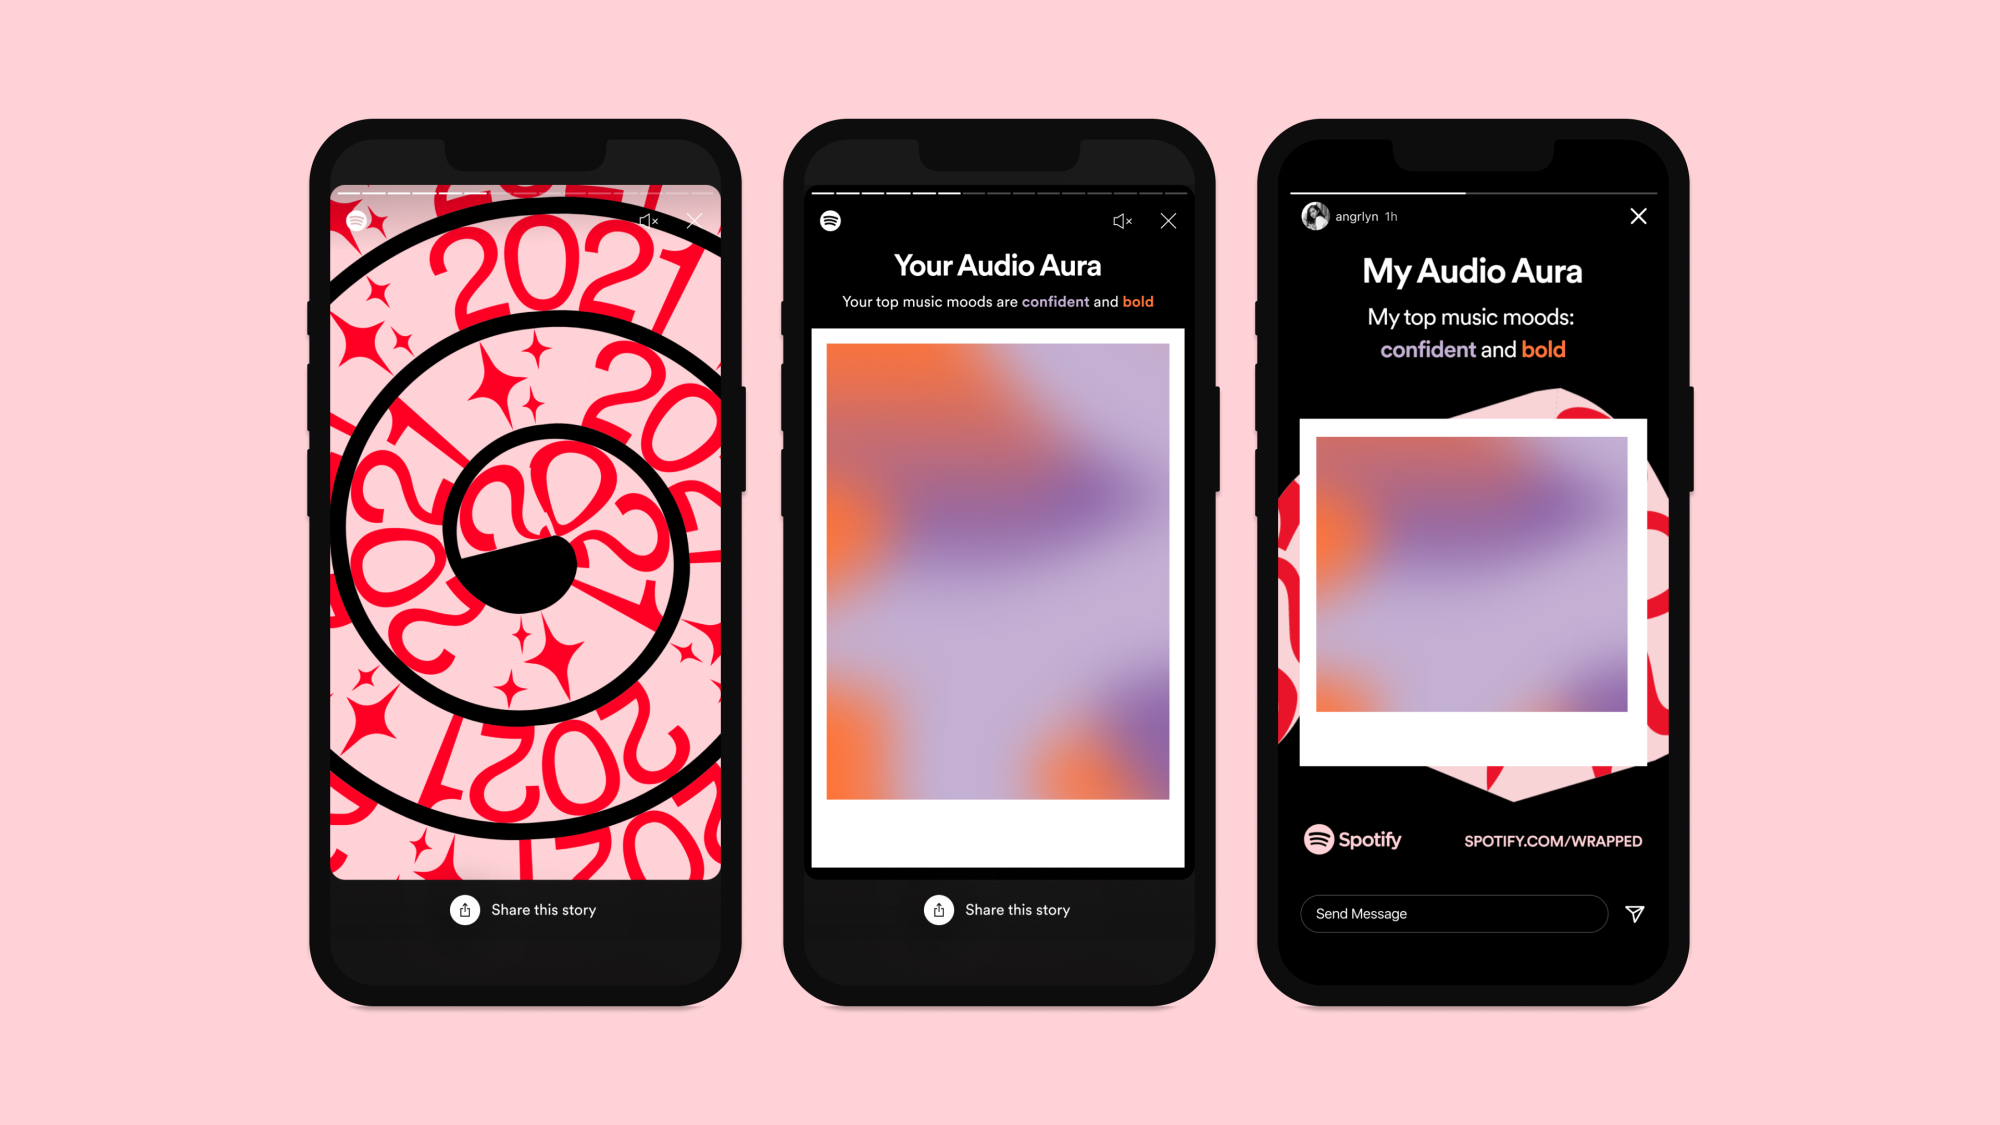 Three images of Spotify Wrapped's Audio Auras.